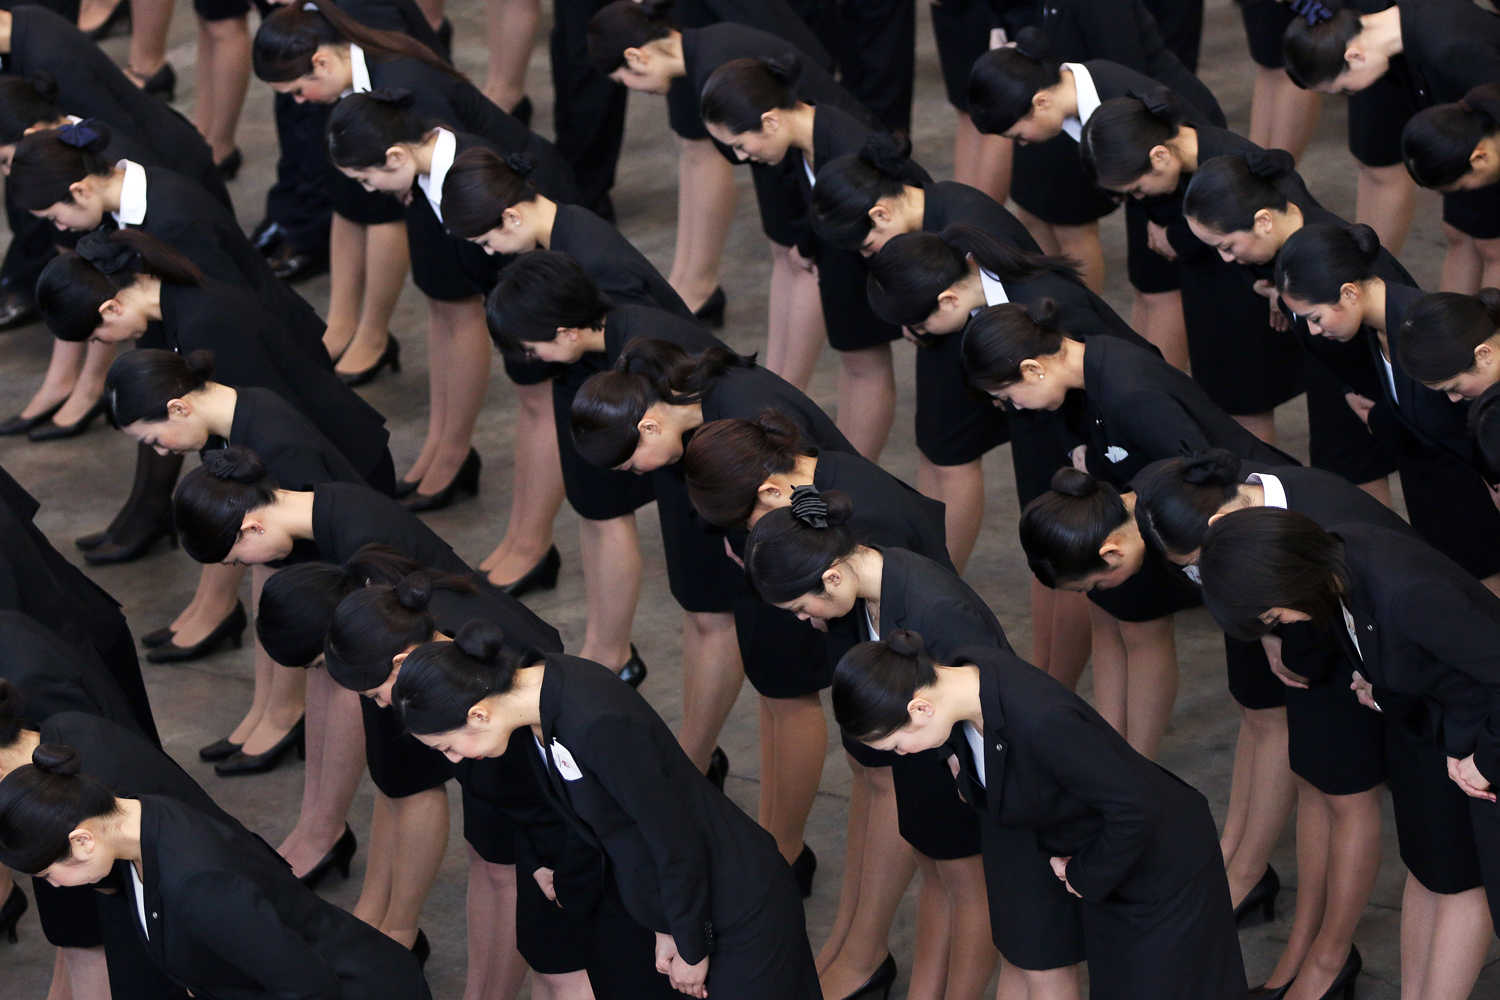 Apr. 1, 2014. Japan Airlines Co. (JAL) group companies' new employees bow during a welcoming ceremony at the company's hangar near Haneda Airport in Tokyo, Japan.